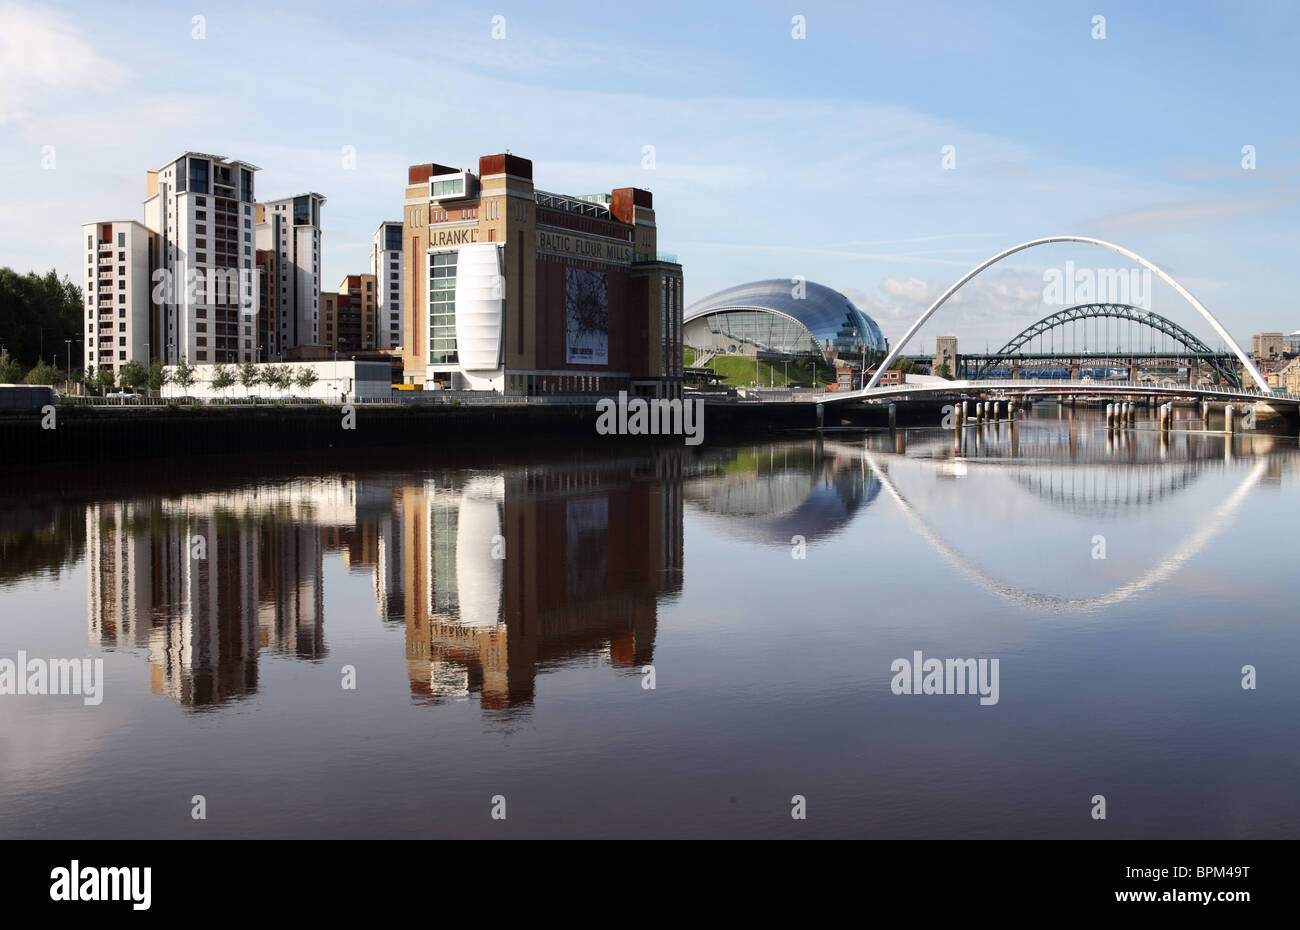 Gateshead riverside including the Baltic Arts Centre and the Sage concert hall reflected in the river Tyne. England, UK. Stock Photo